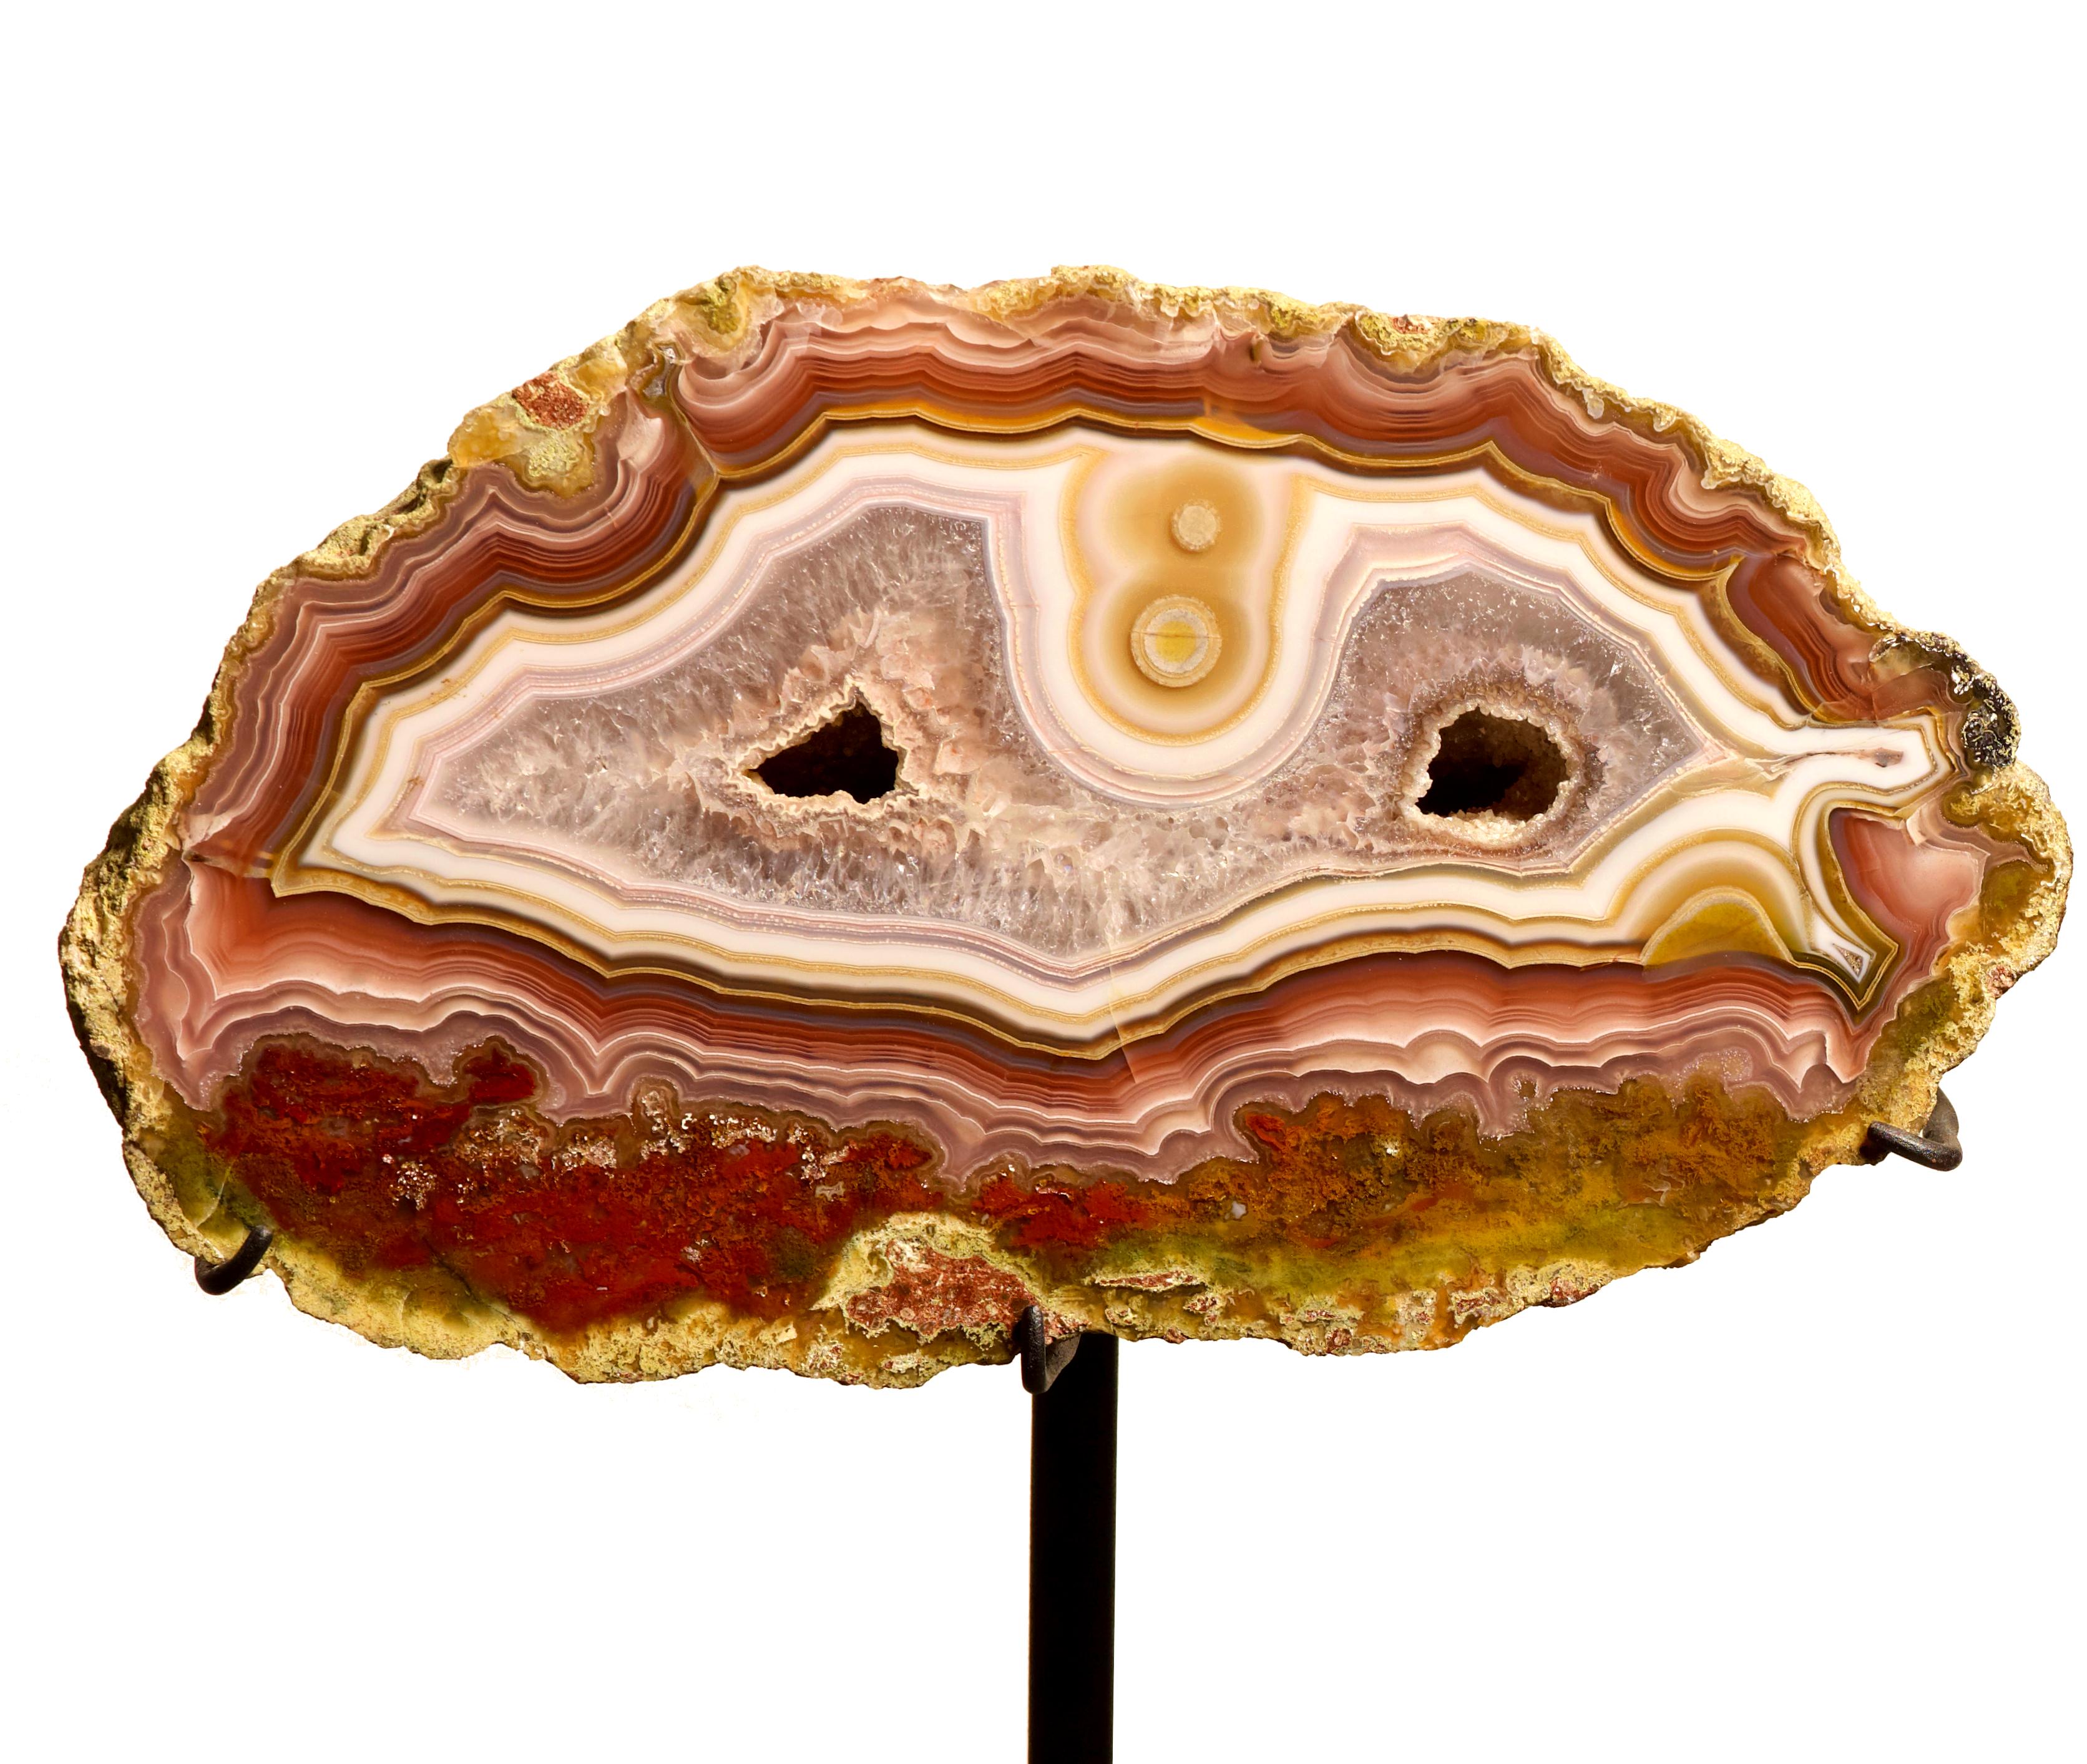 Decorative stand Rare type AGATE pair , Aguas Calientes agatas from Chihuahua, Mexico.
Mexican agate is the most sought after in the world , due to the very fine banding.
Welcome positive energy into one's interior with this massive and spectacular